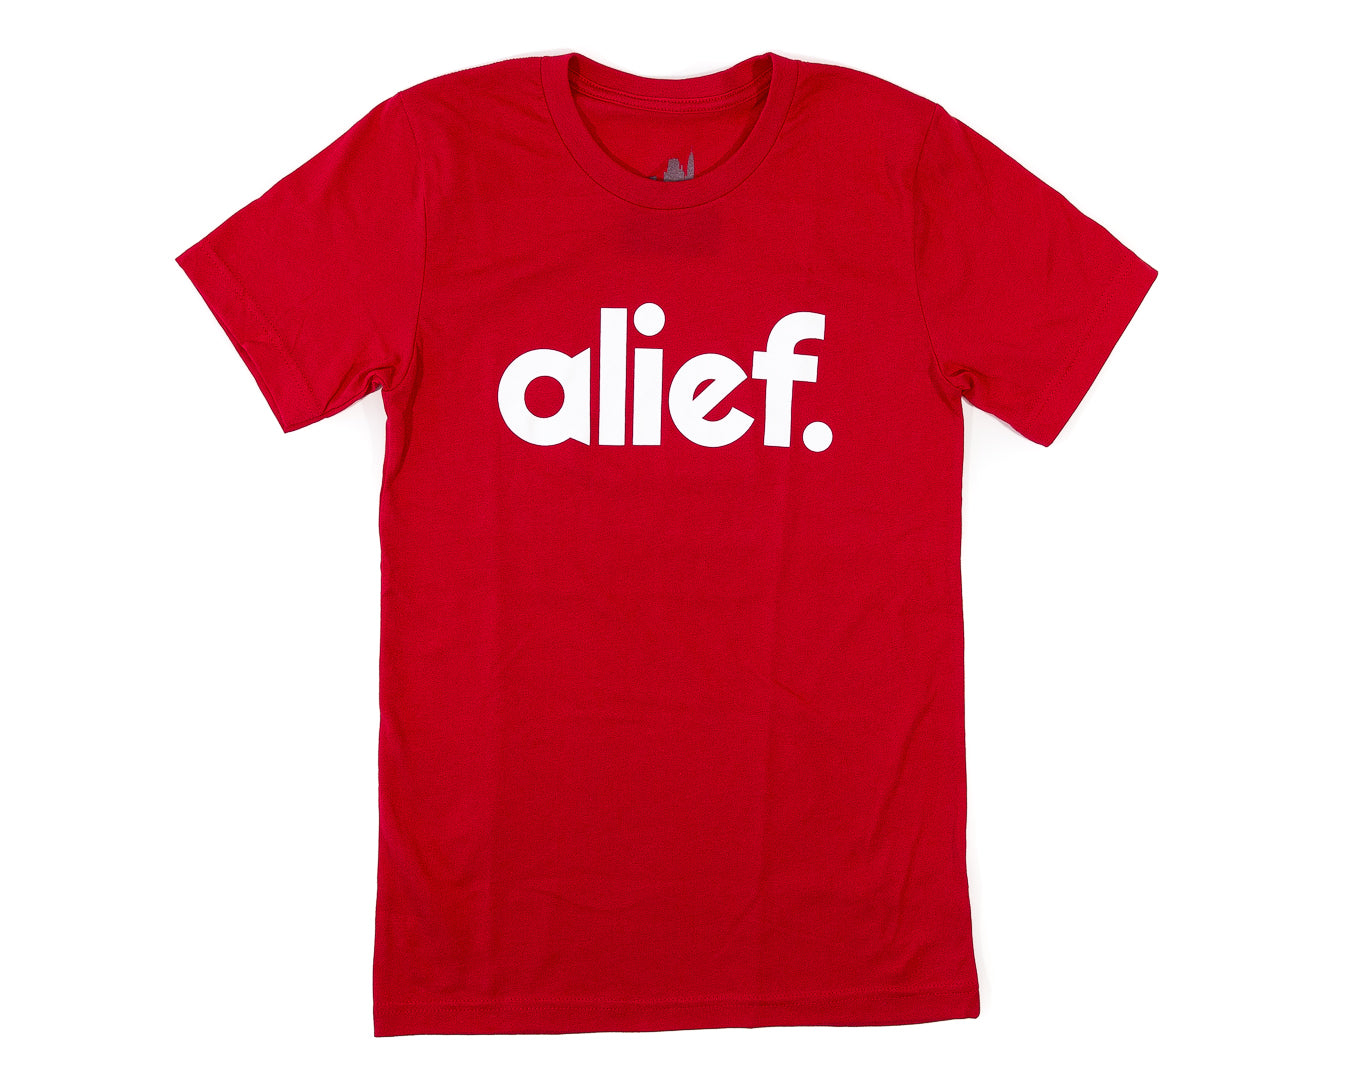 Bold Alief Tee - Red/ White